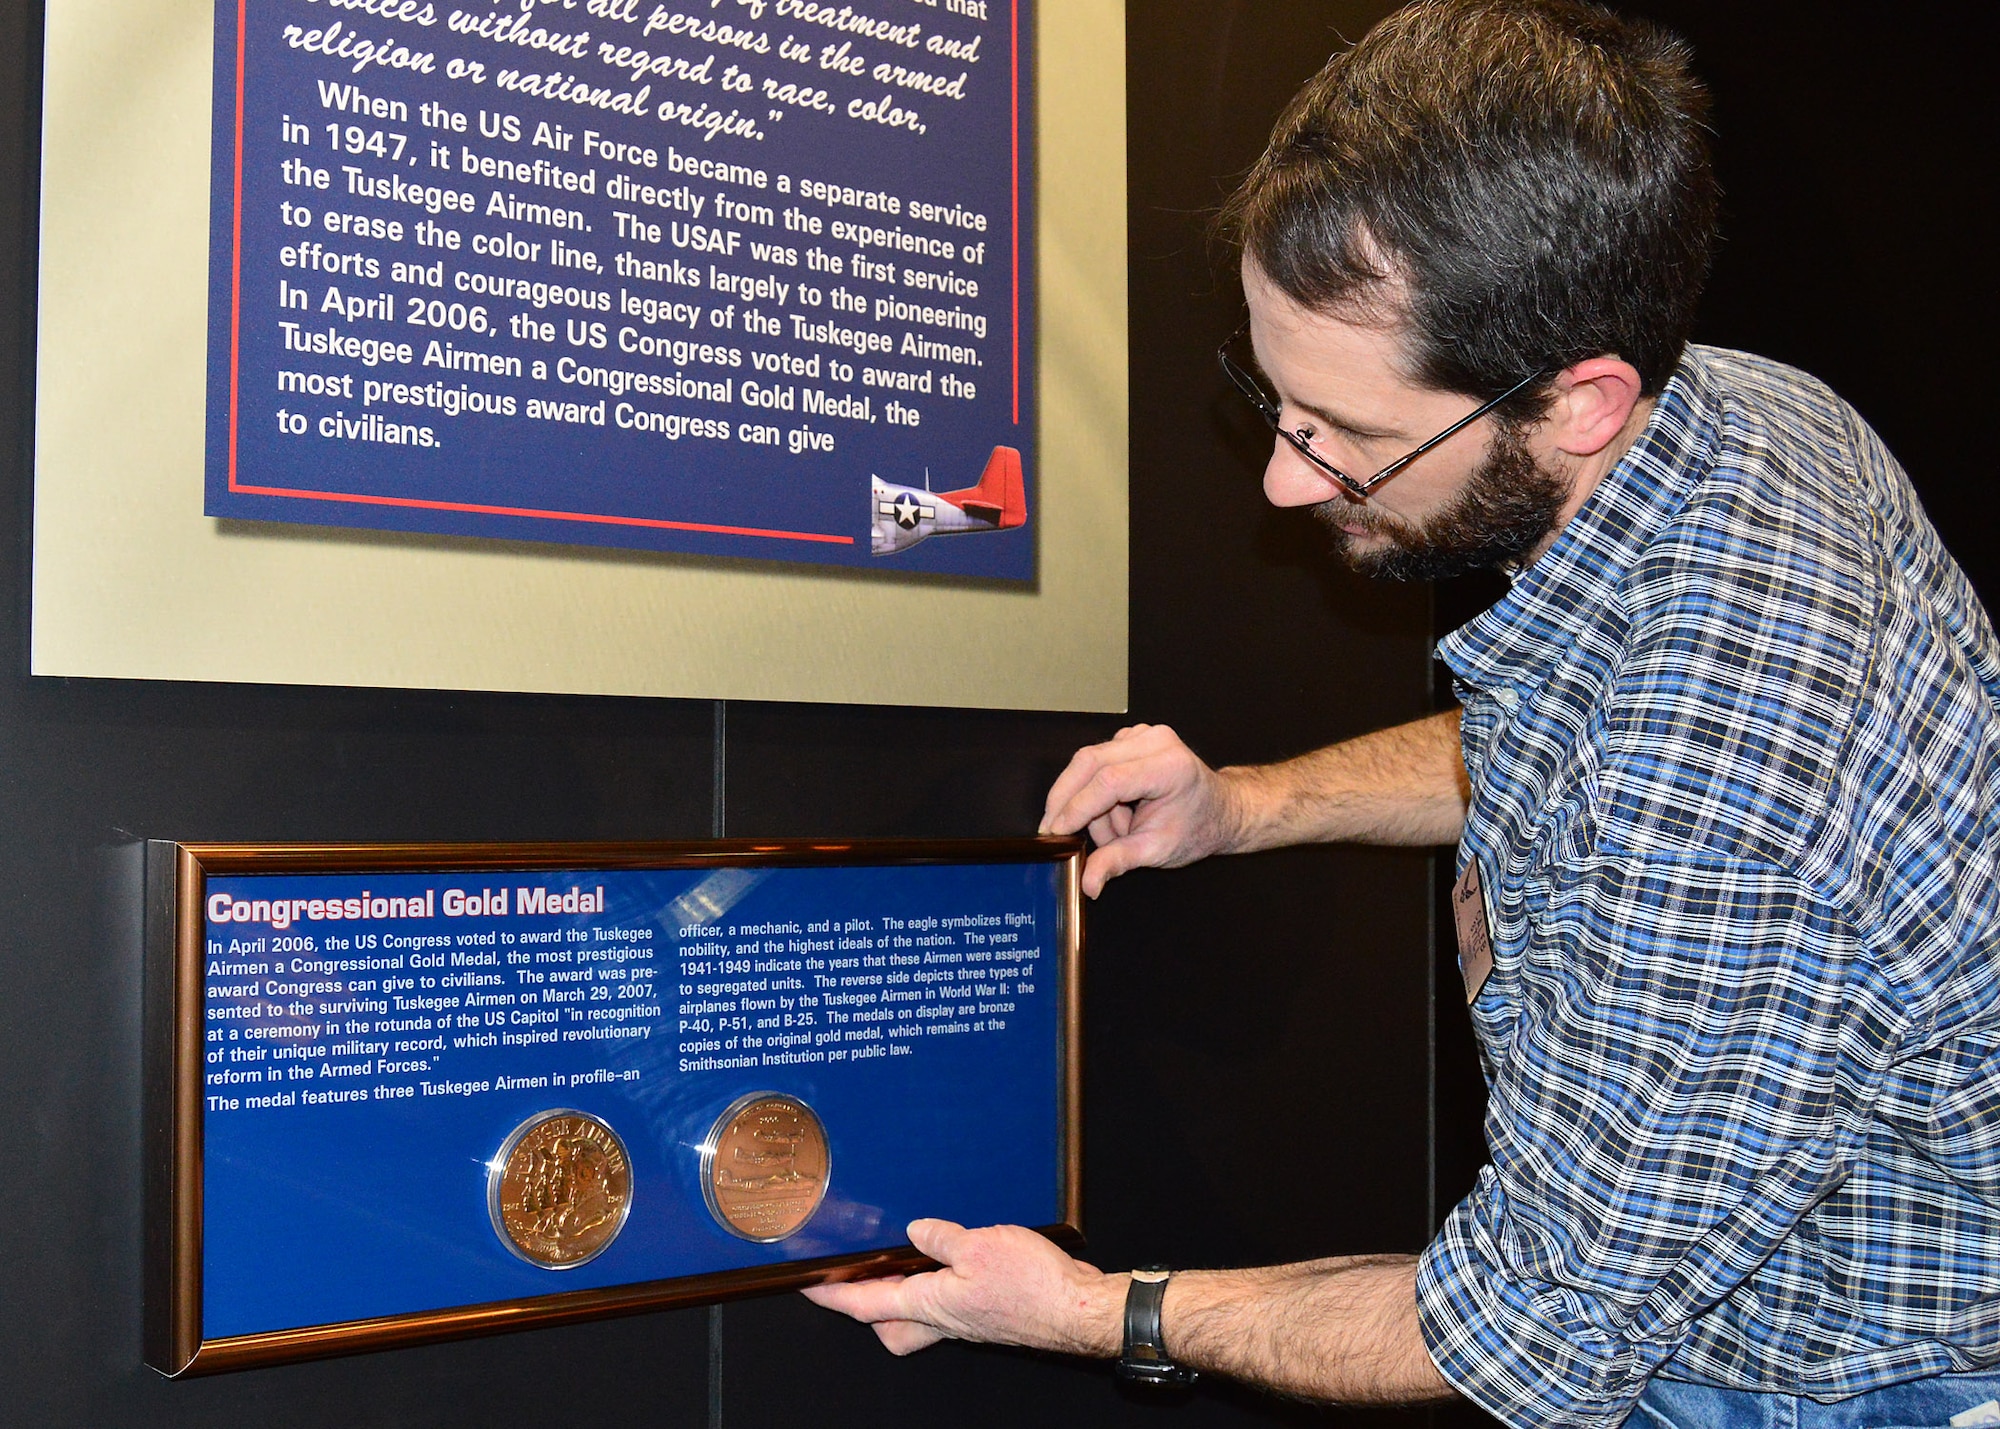 DAYTON, Ohio -- The Tuskegee Airmen Congressional Gold Medal being installed by Exhibits Specialist Caleb Still in the WWII Gallery at the National Museum of the U.S. Air Force. In April 2006, the U.S. Congress voted to award the Tuskegee Airmen a Congressional Gold Medal, the most prestigious award Congress can give to civilians. (U.S. Air Force photo) 
